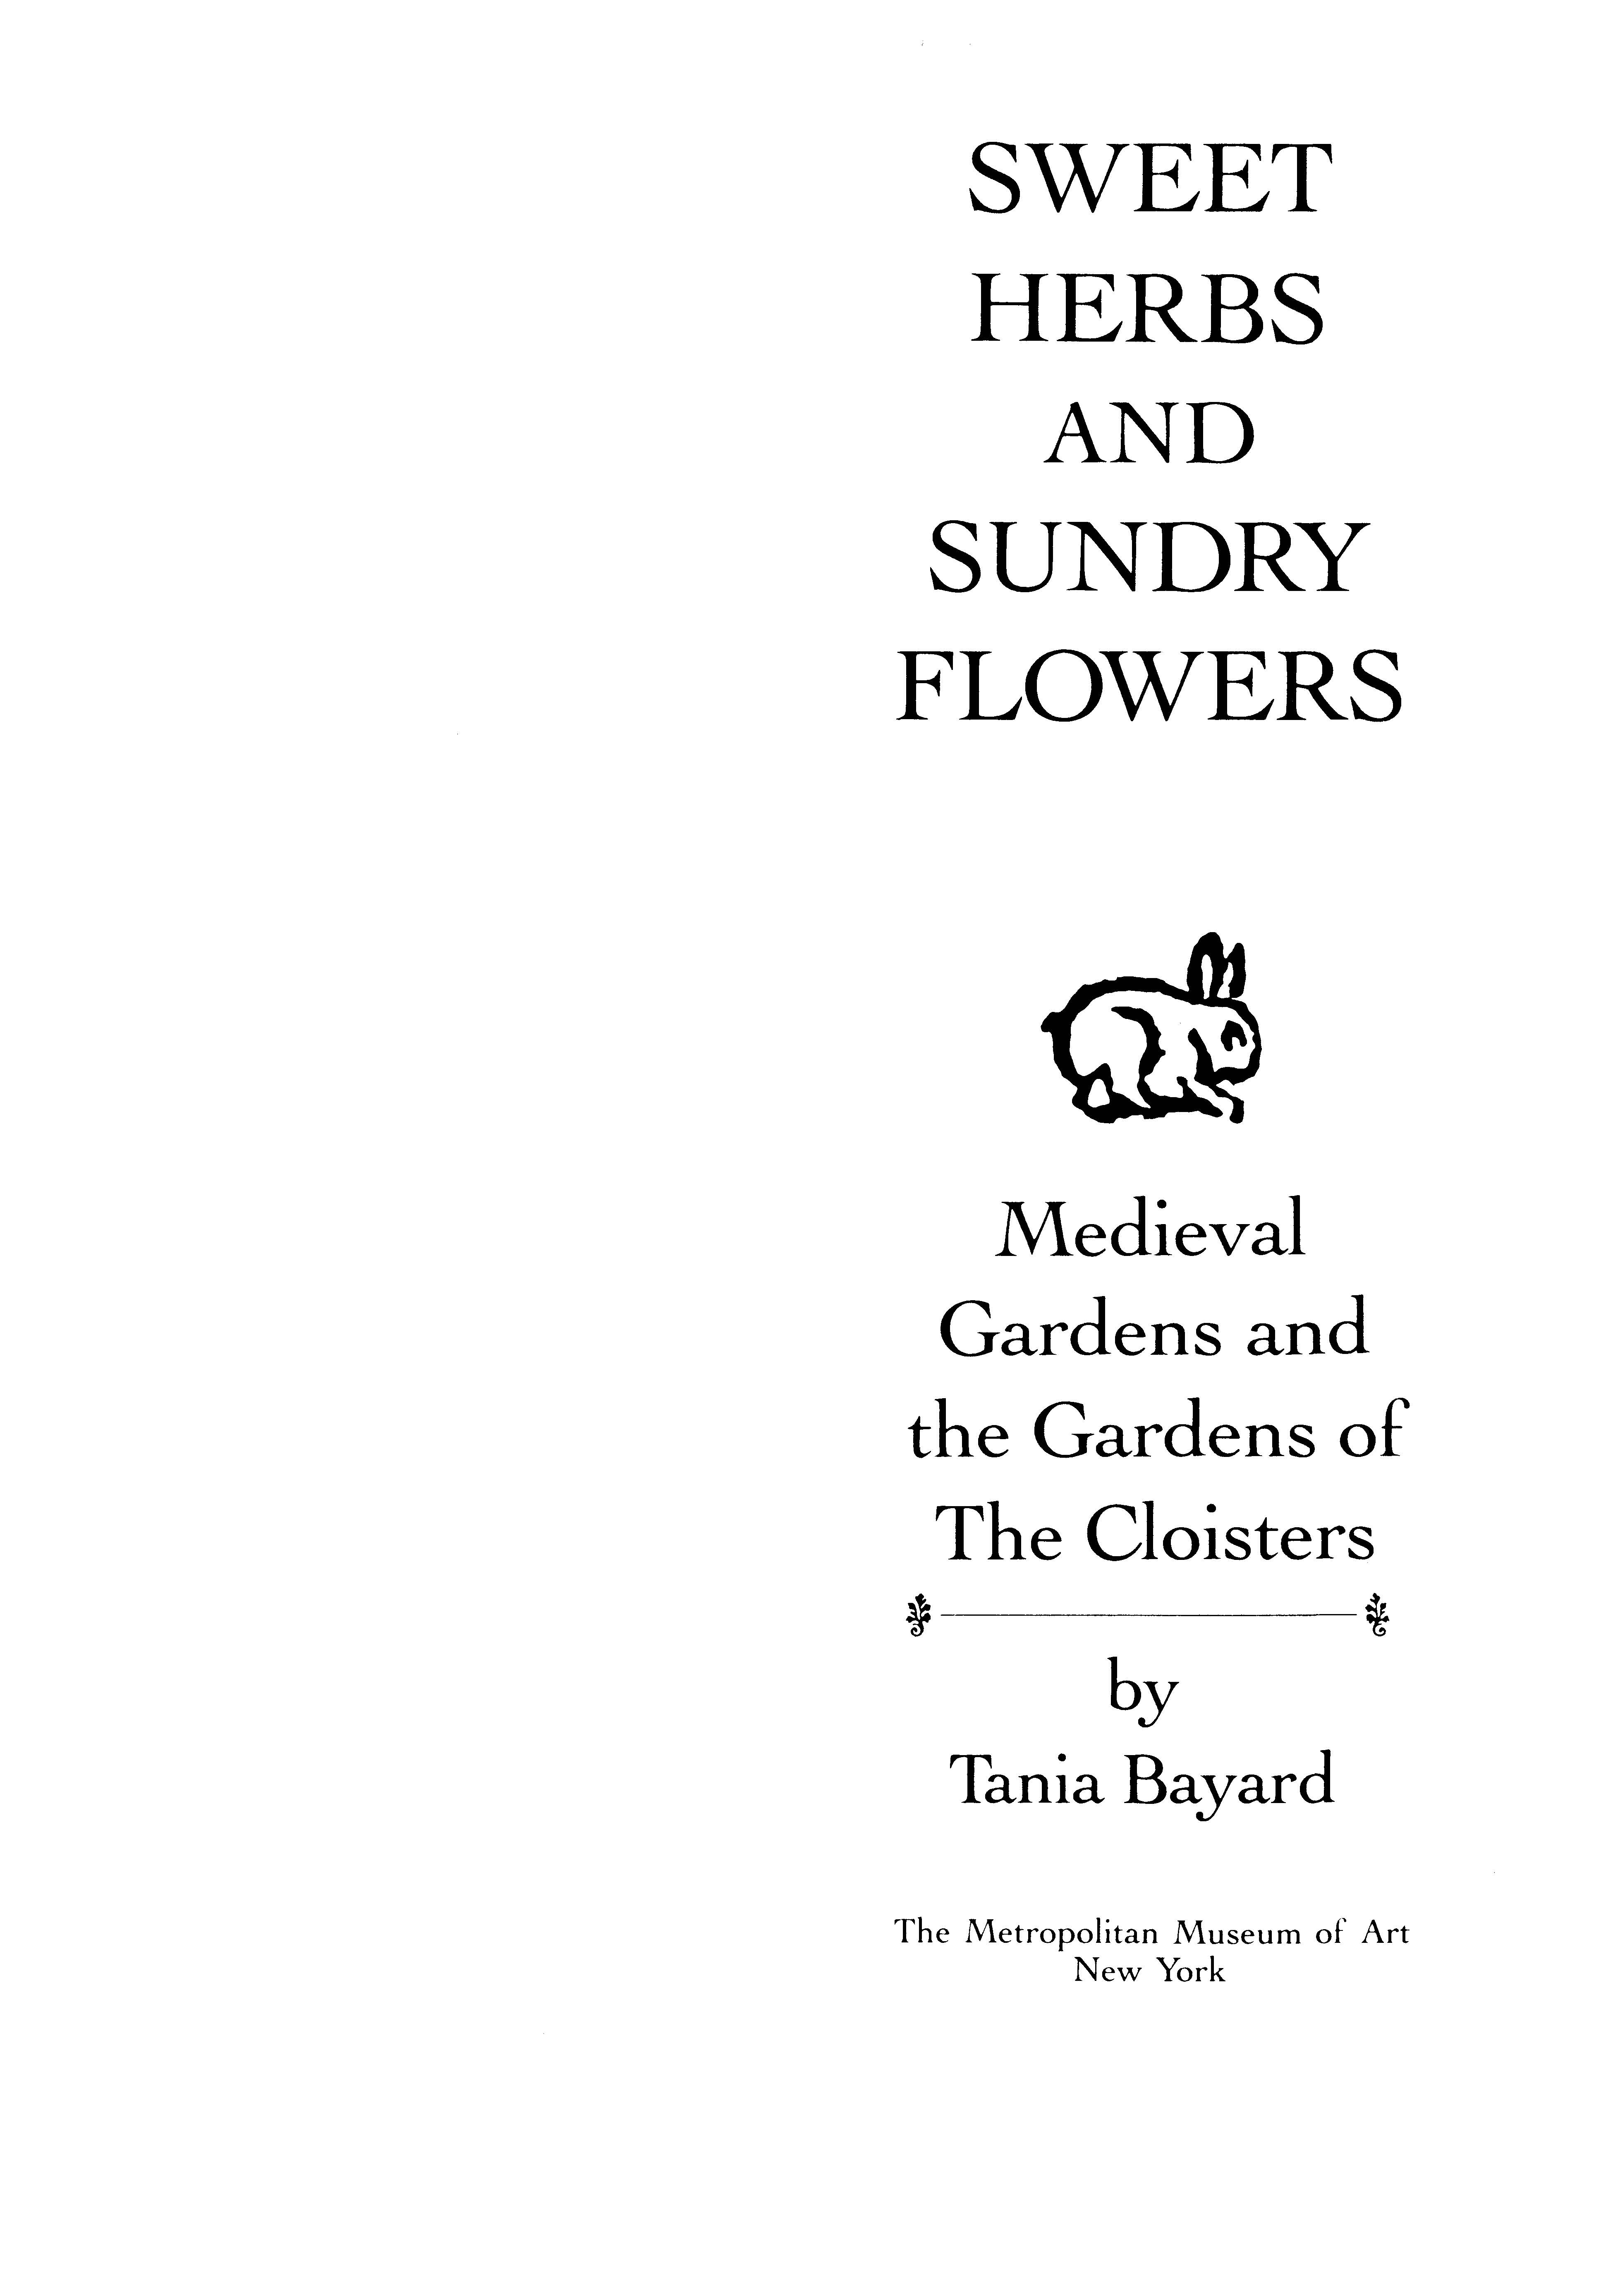 Sweet Herbs and Sundry Flowers: Medieval Gardens and the Gardens of The Cloisters / Tania Bayard. — New York : Metropolitan Museum of Art, 1997